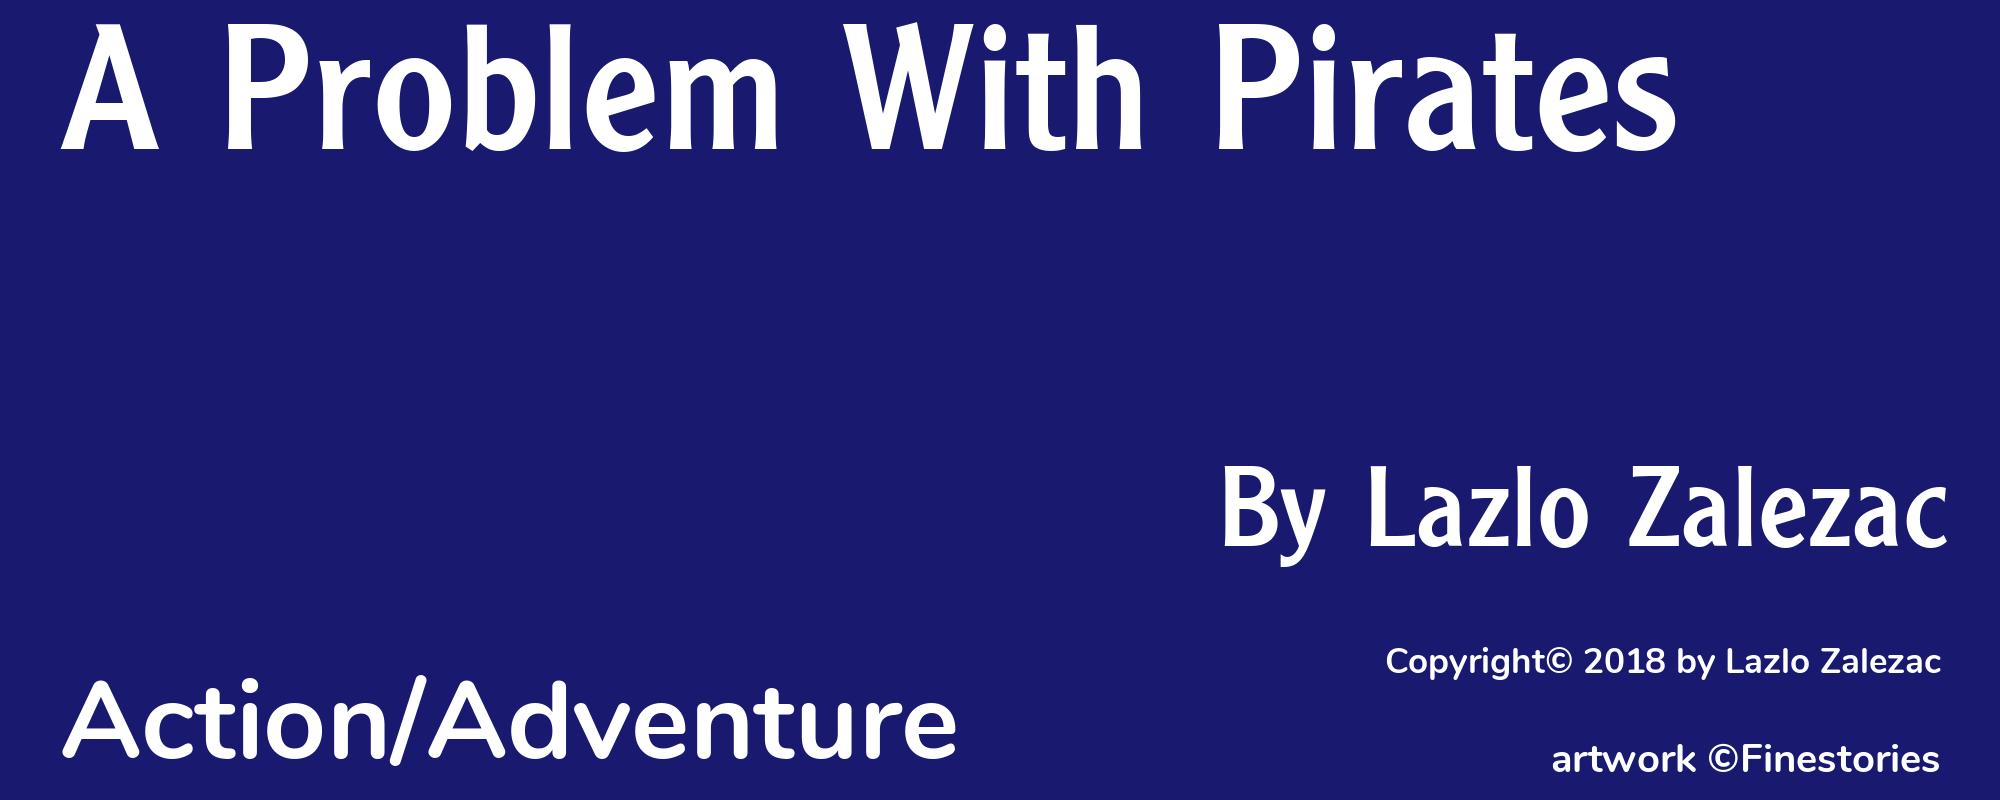 A Problem With Pirates - Cover